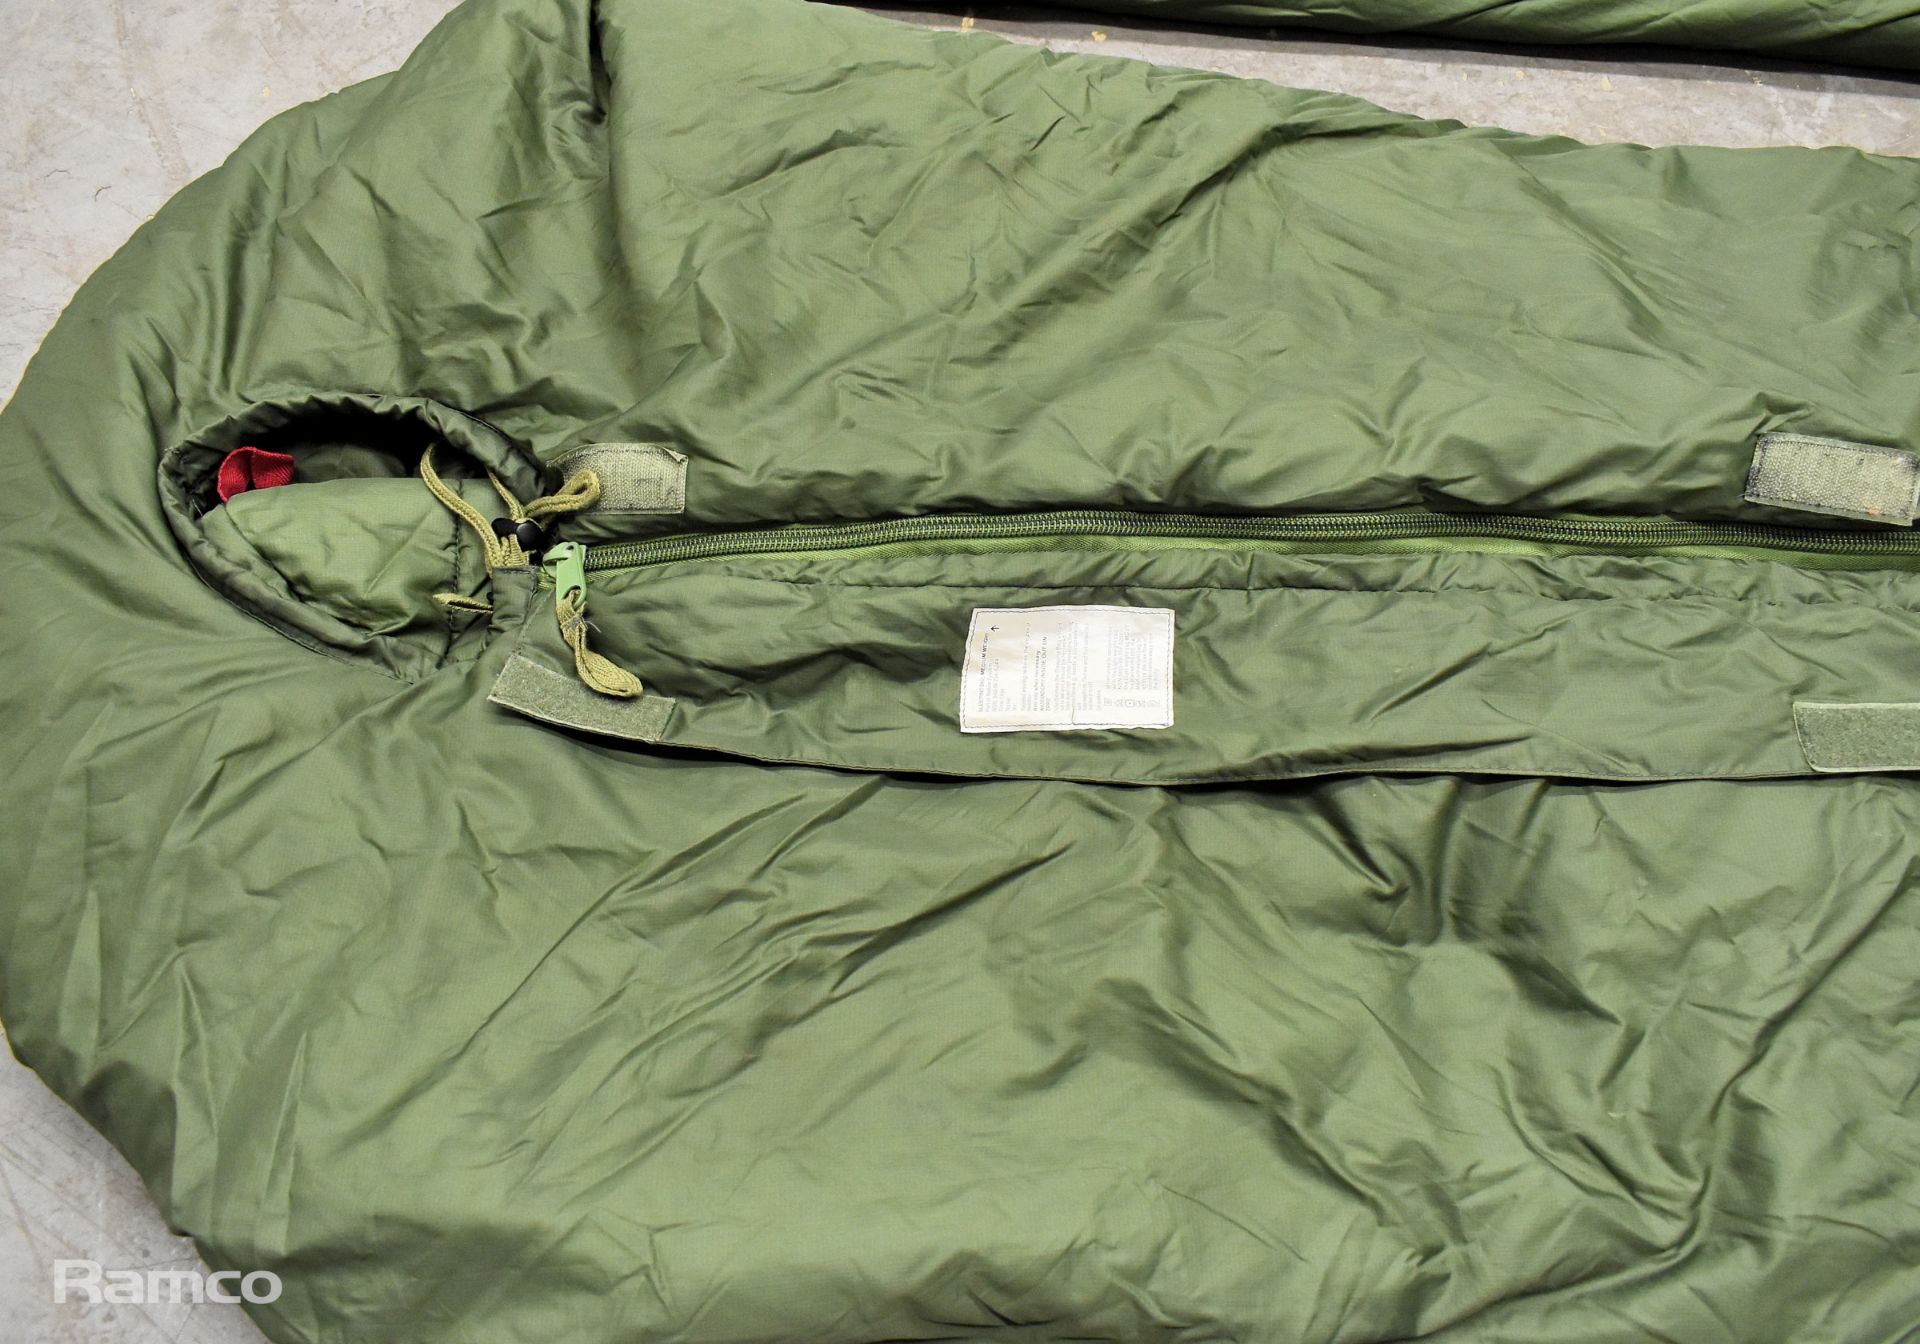 49x Sleeping bags - mixed grades and sizes - Image 6 of 8